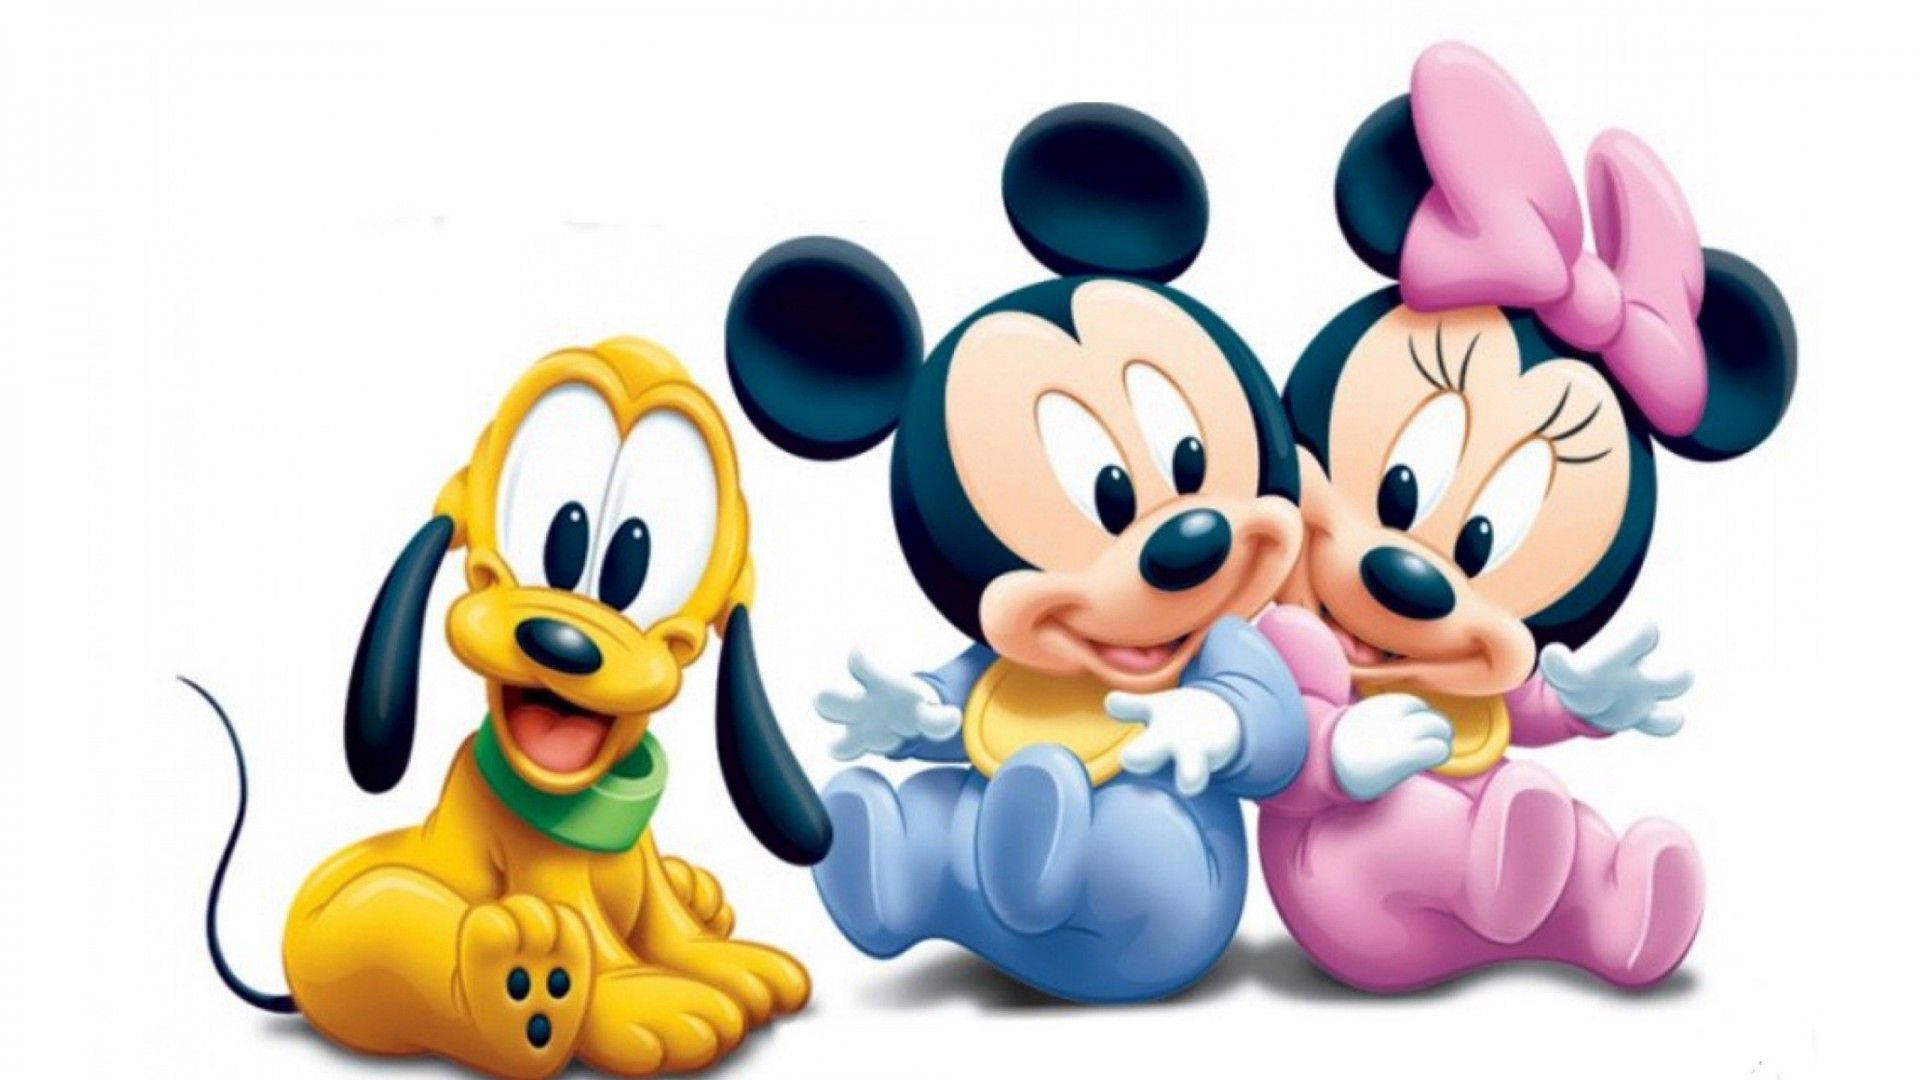 Baby Minnie Mouse And Friends Wallpaper